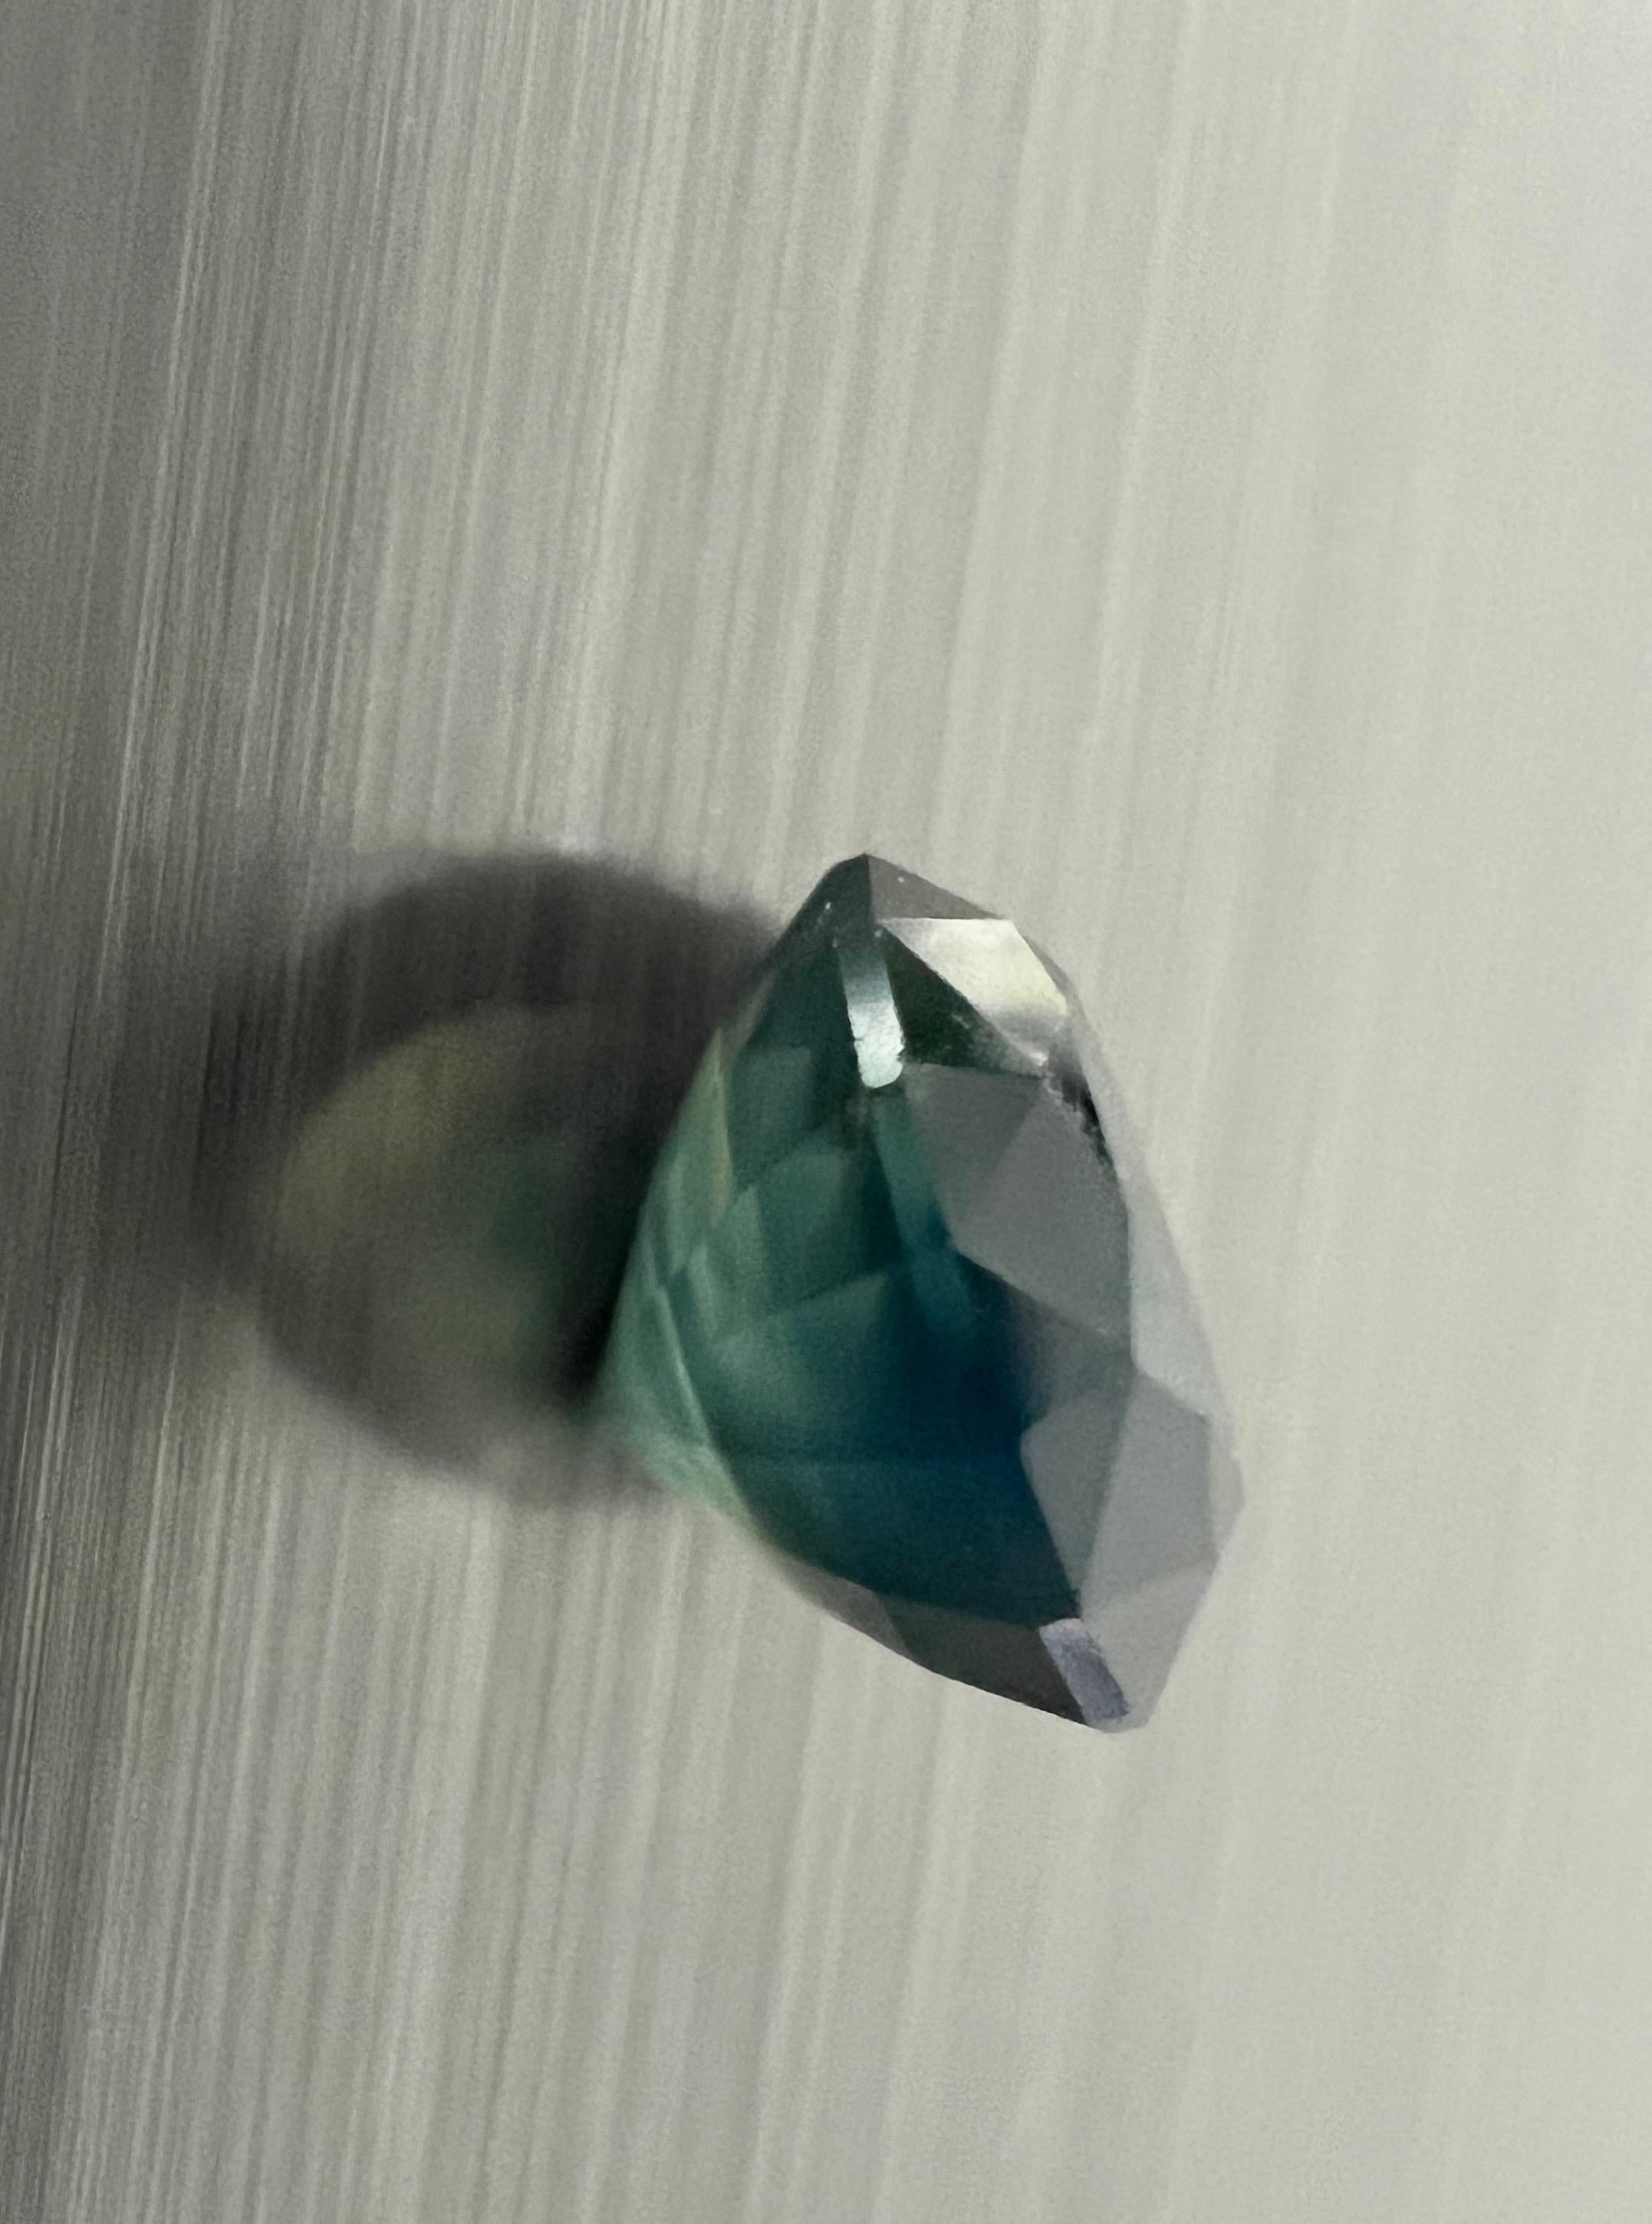 Artisan 2.0ct Round Teal NATURAL Unheated SAPPHIRE Gemstone For Sale